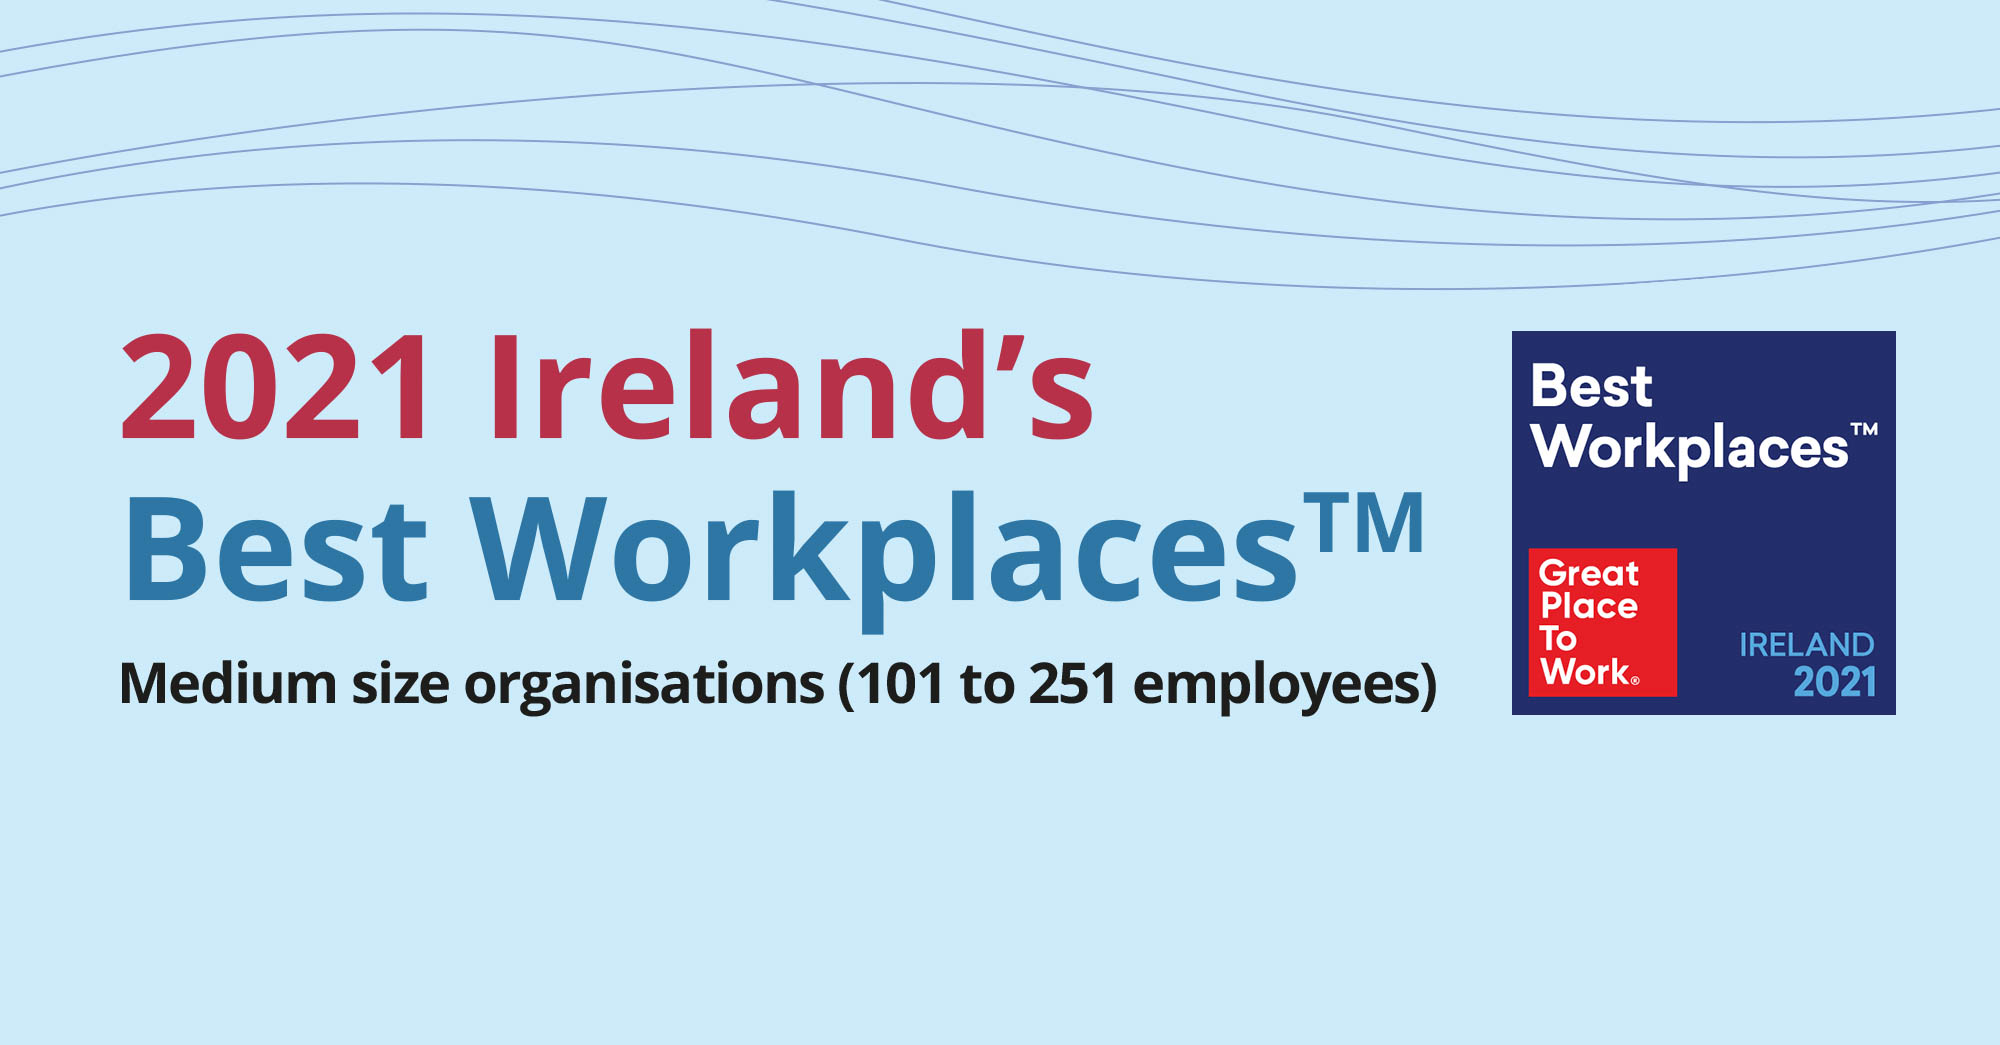 We’re one of Ireland’s Best Workplaces™ 2021